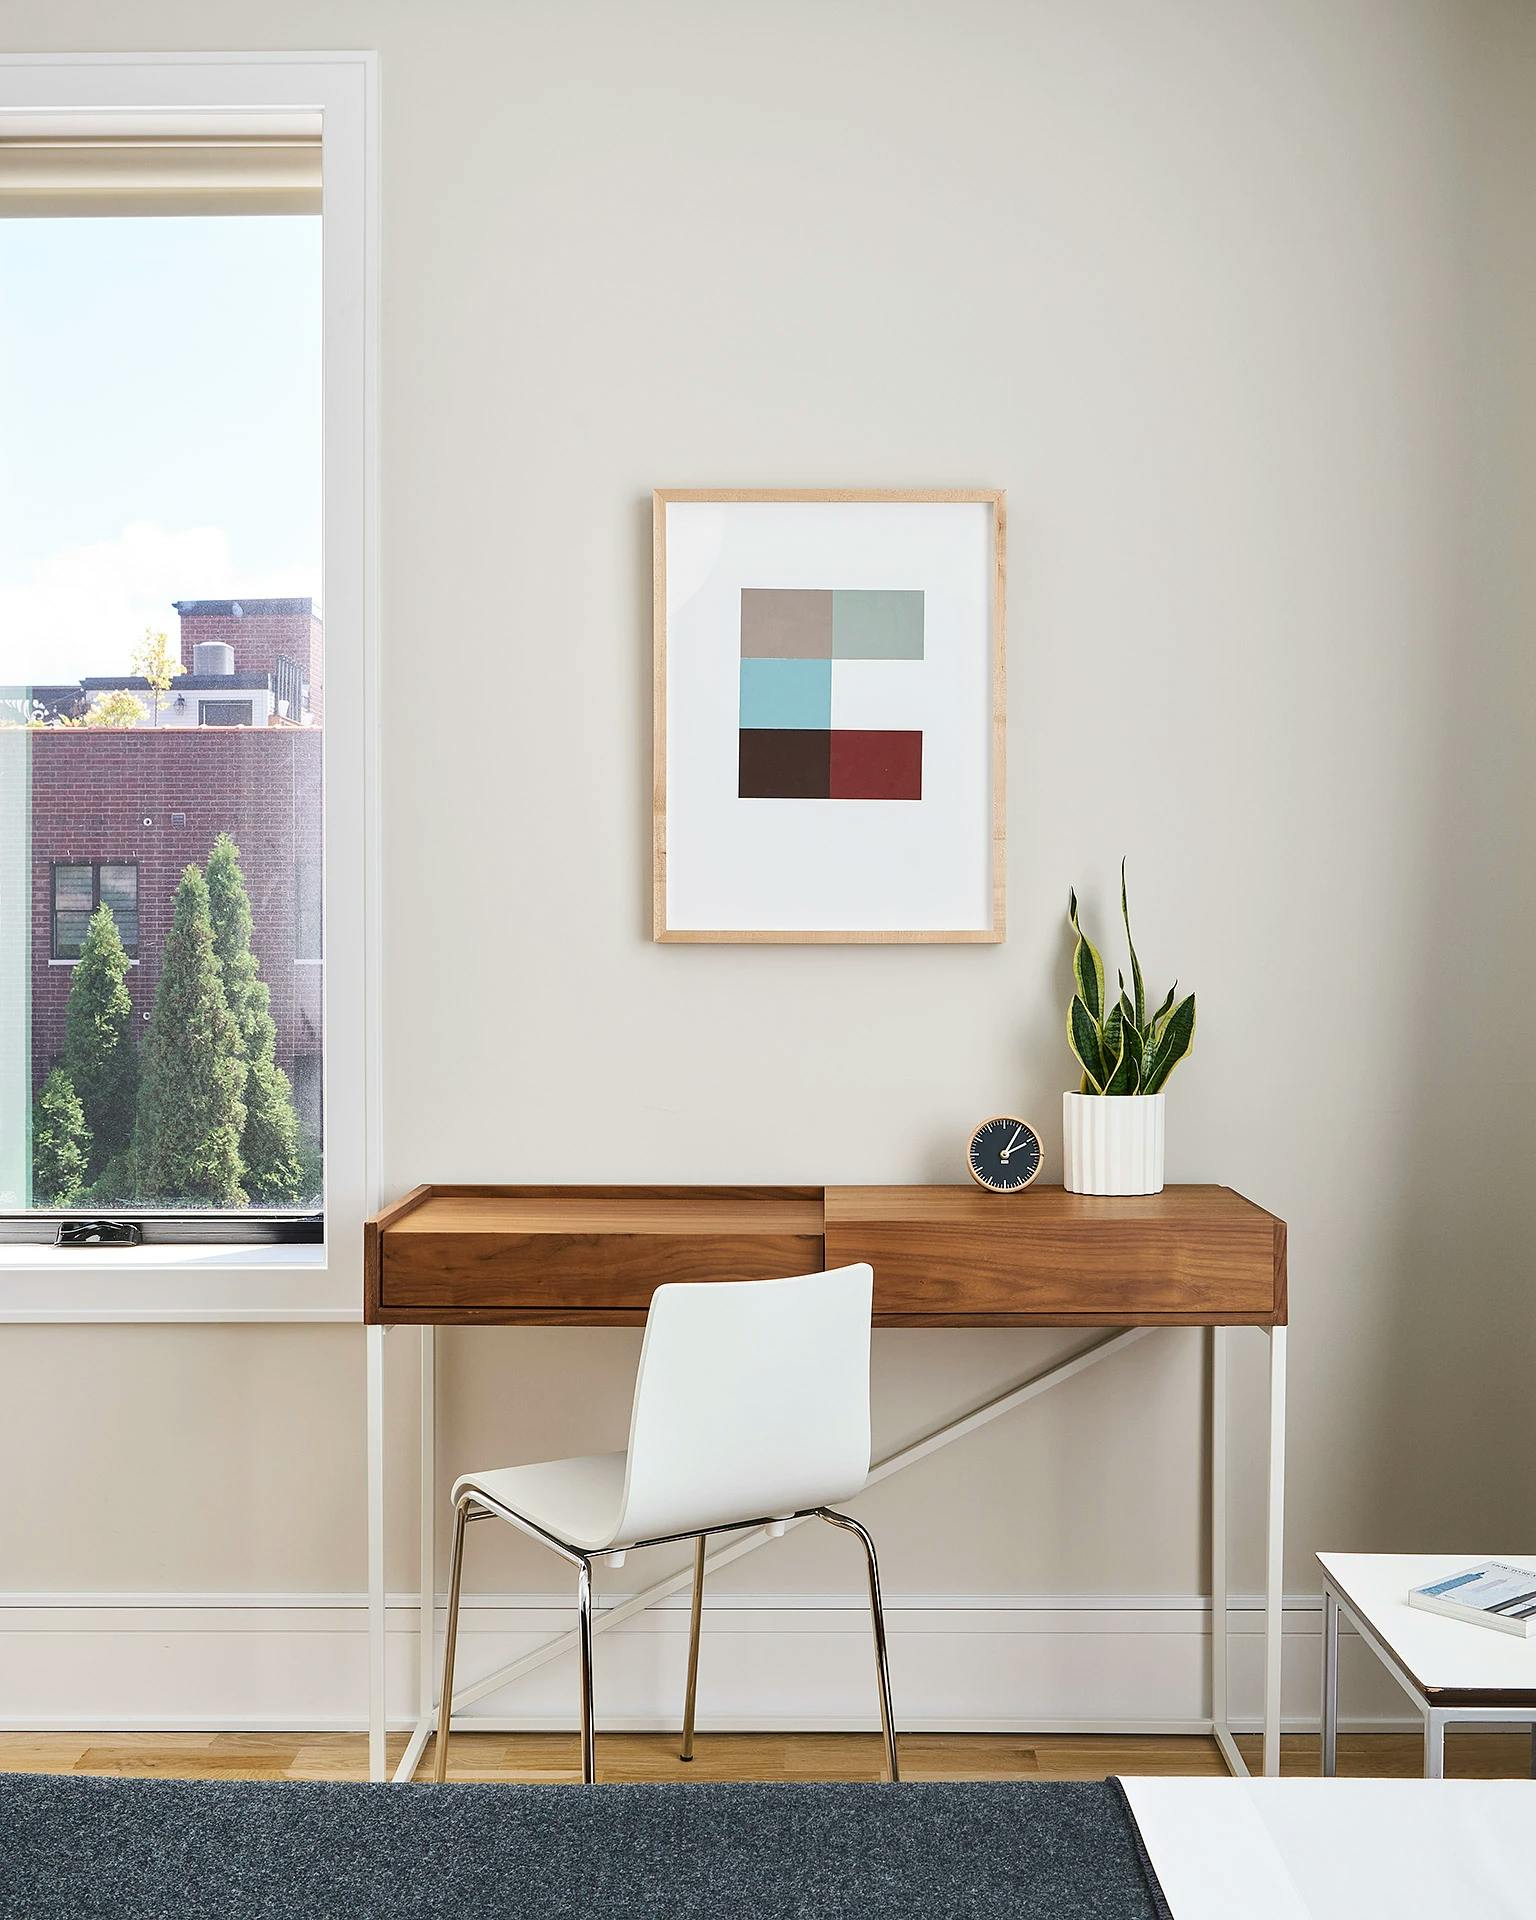 Framed geometric painting by artist Kristin Texeira installed on a white wall above a wooden desk with a white chair in a Chicago apartment.